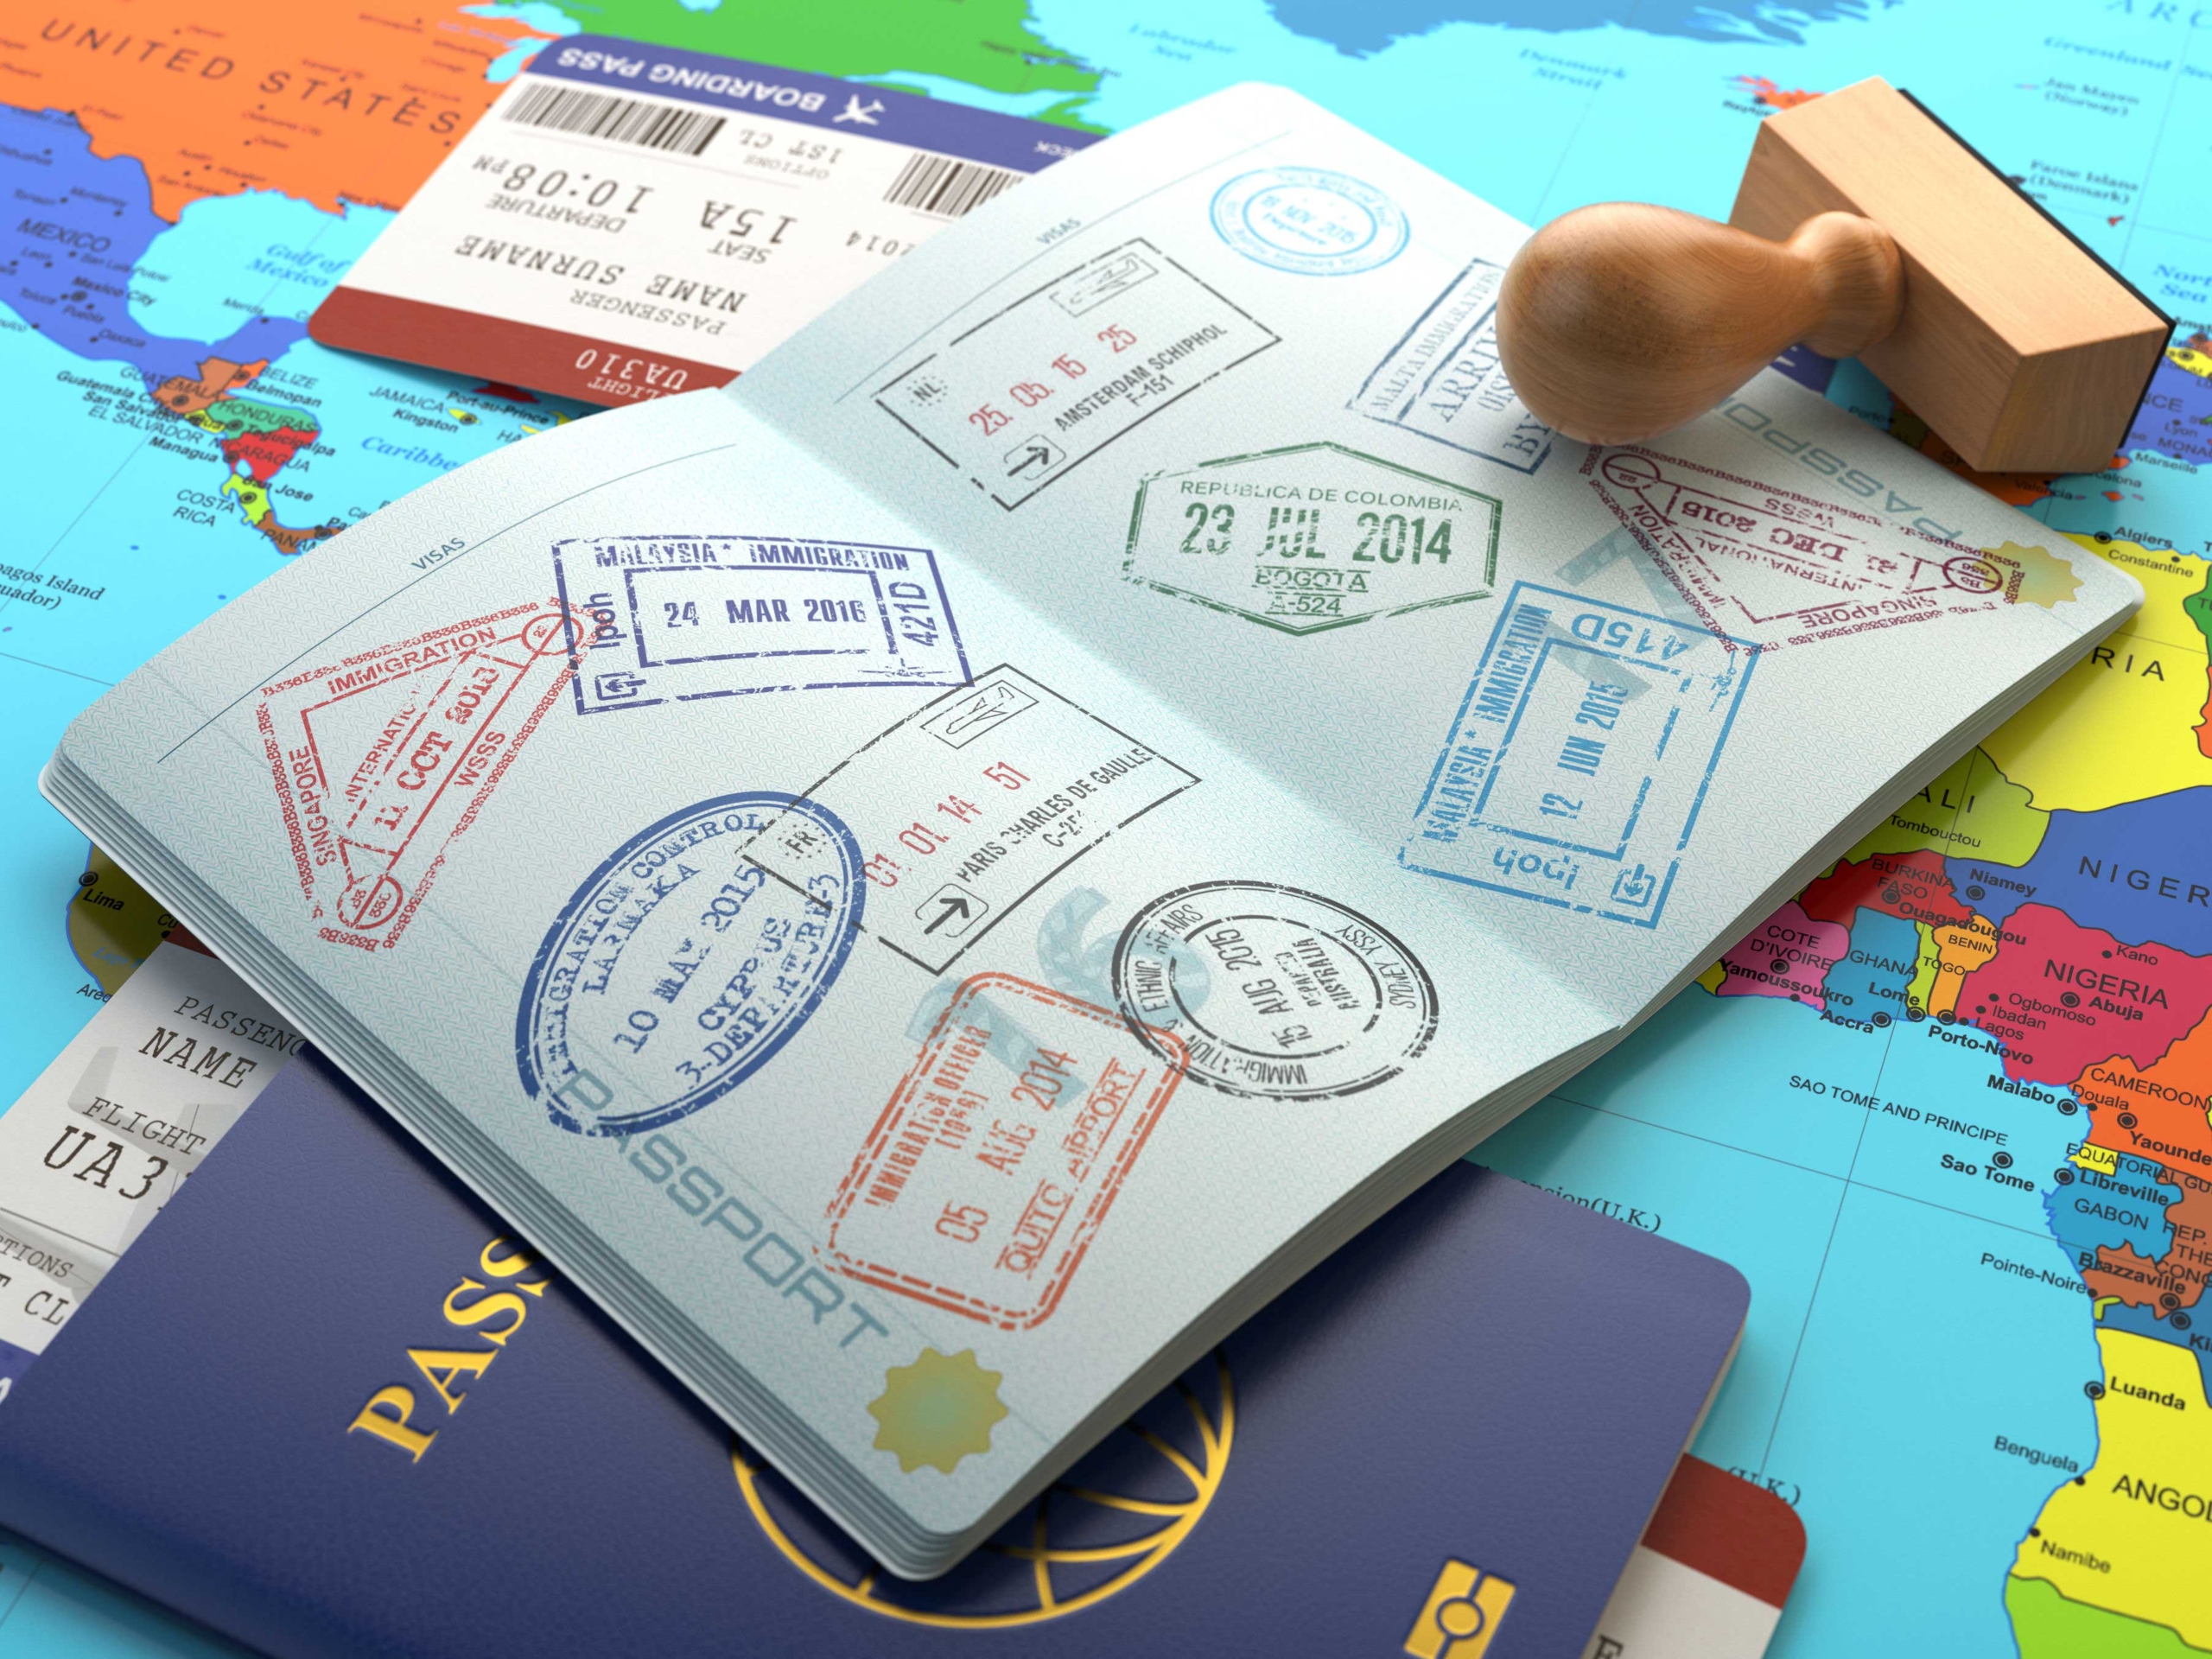 A stock image showing a passport with several stamps